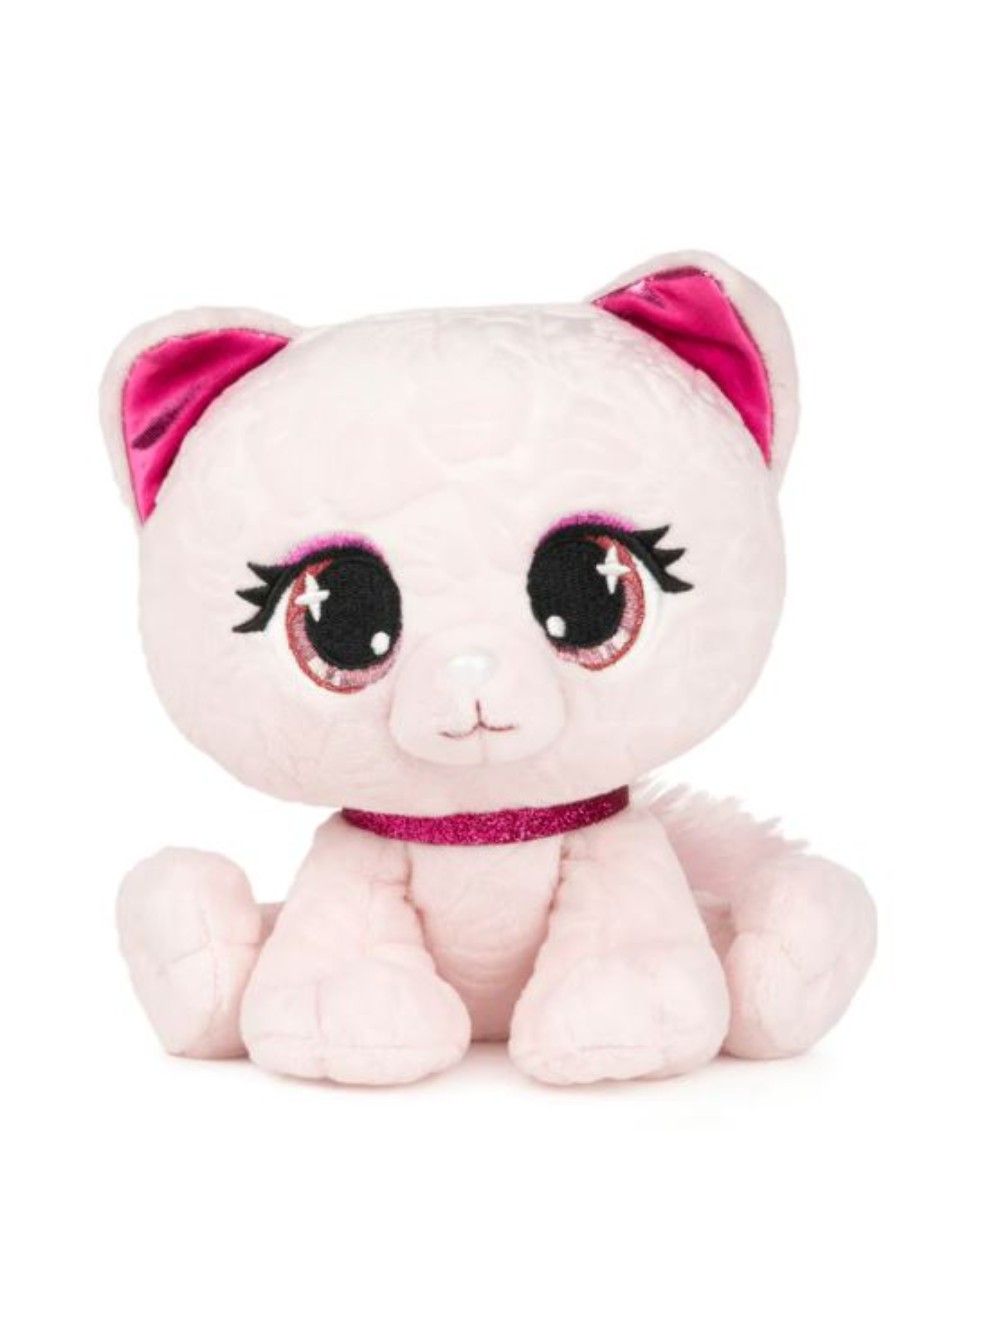 Gund P. Lushes 6 Inches Plush Toy - April Fiore Fashion Pets